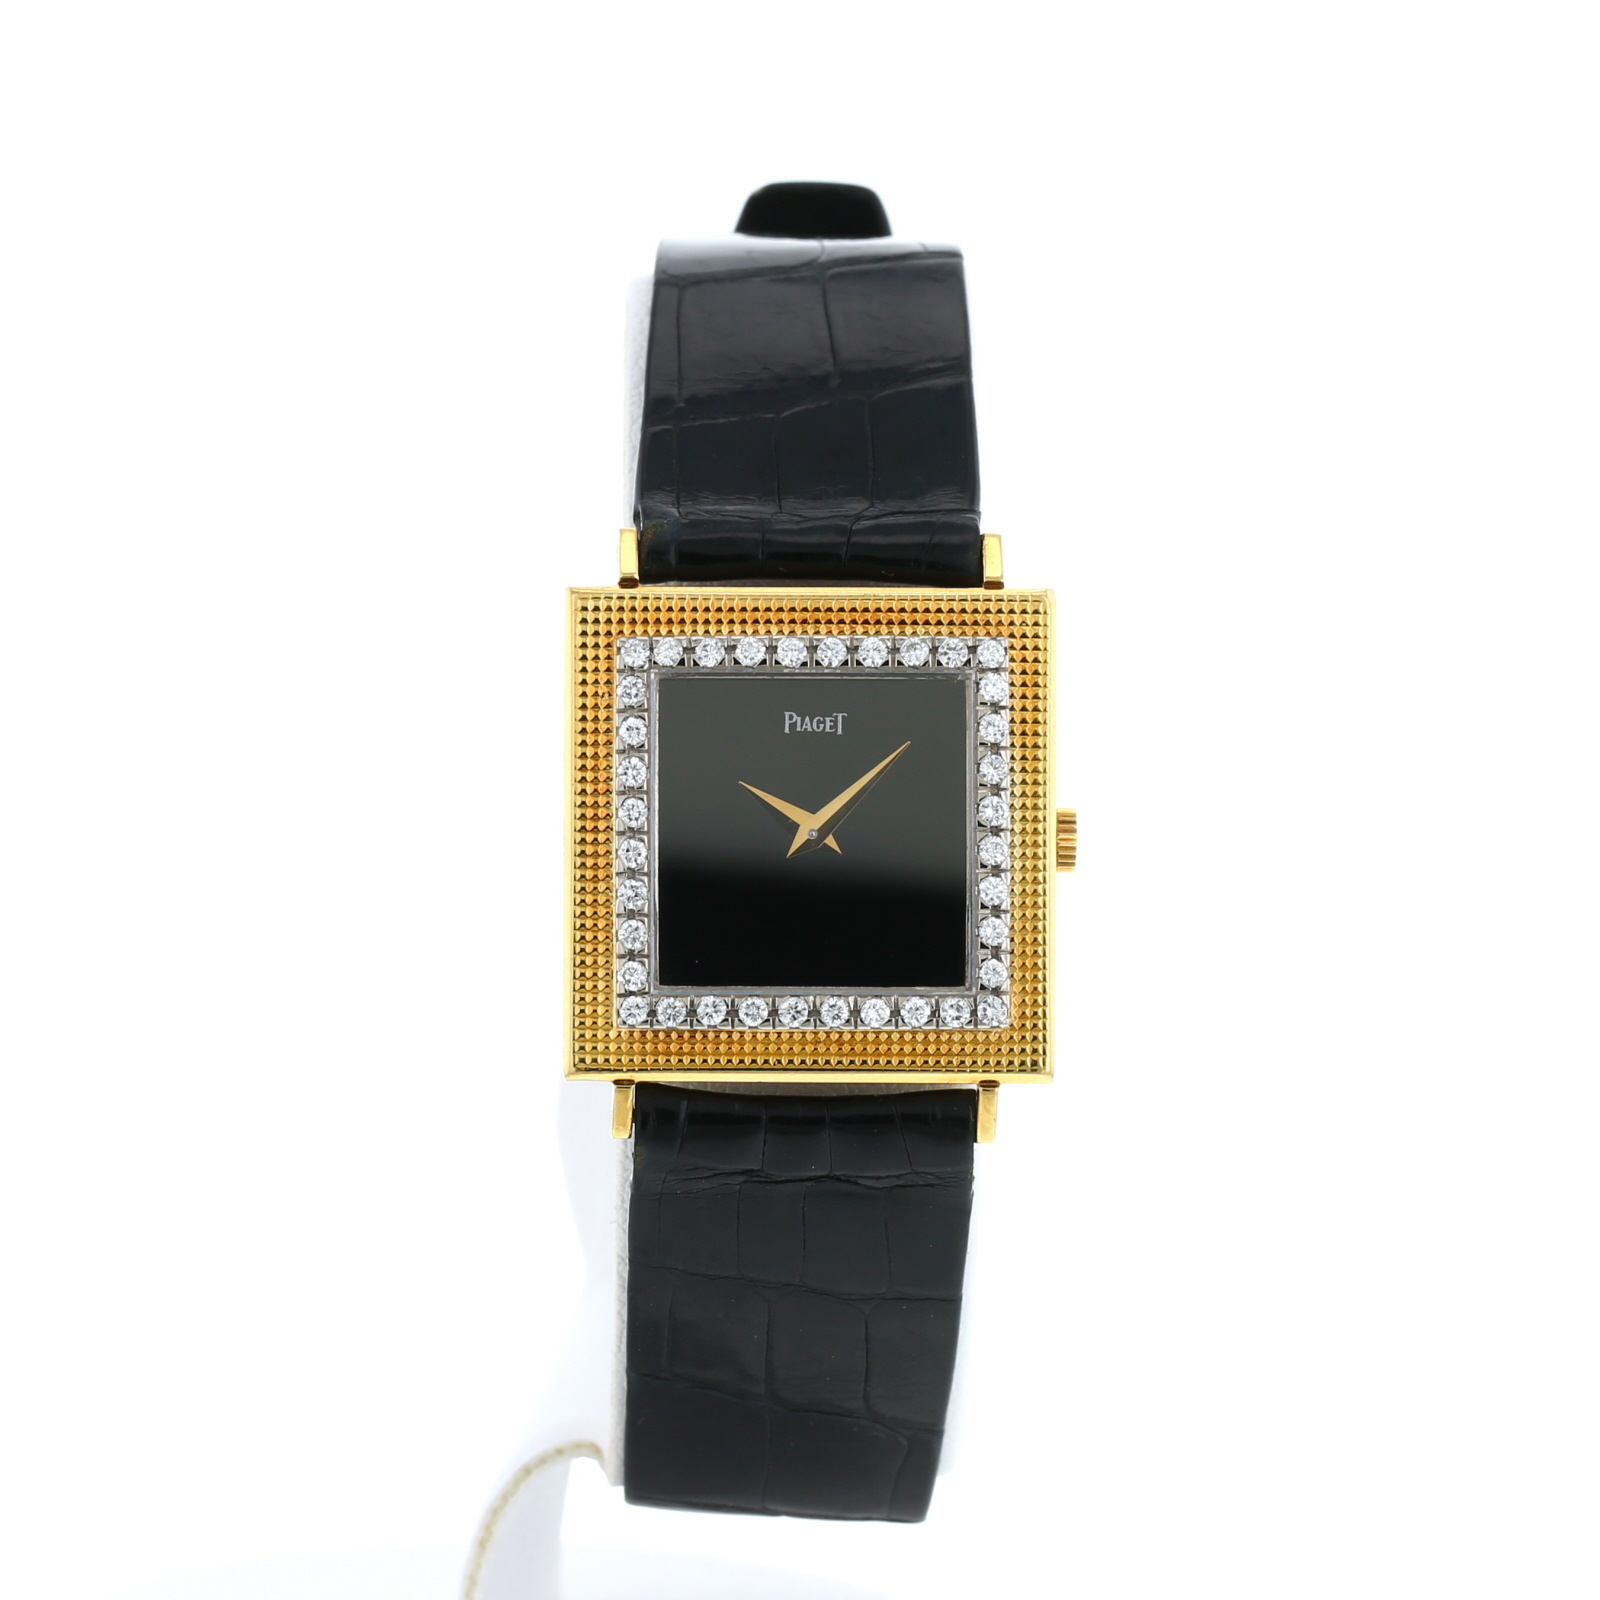 Piaget Vintage Jewel Watch 402147 | Collector Square